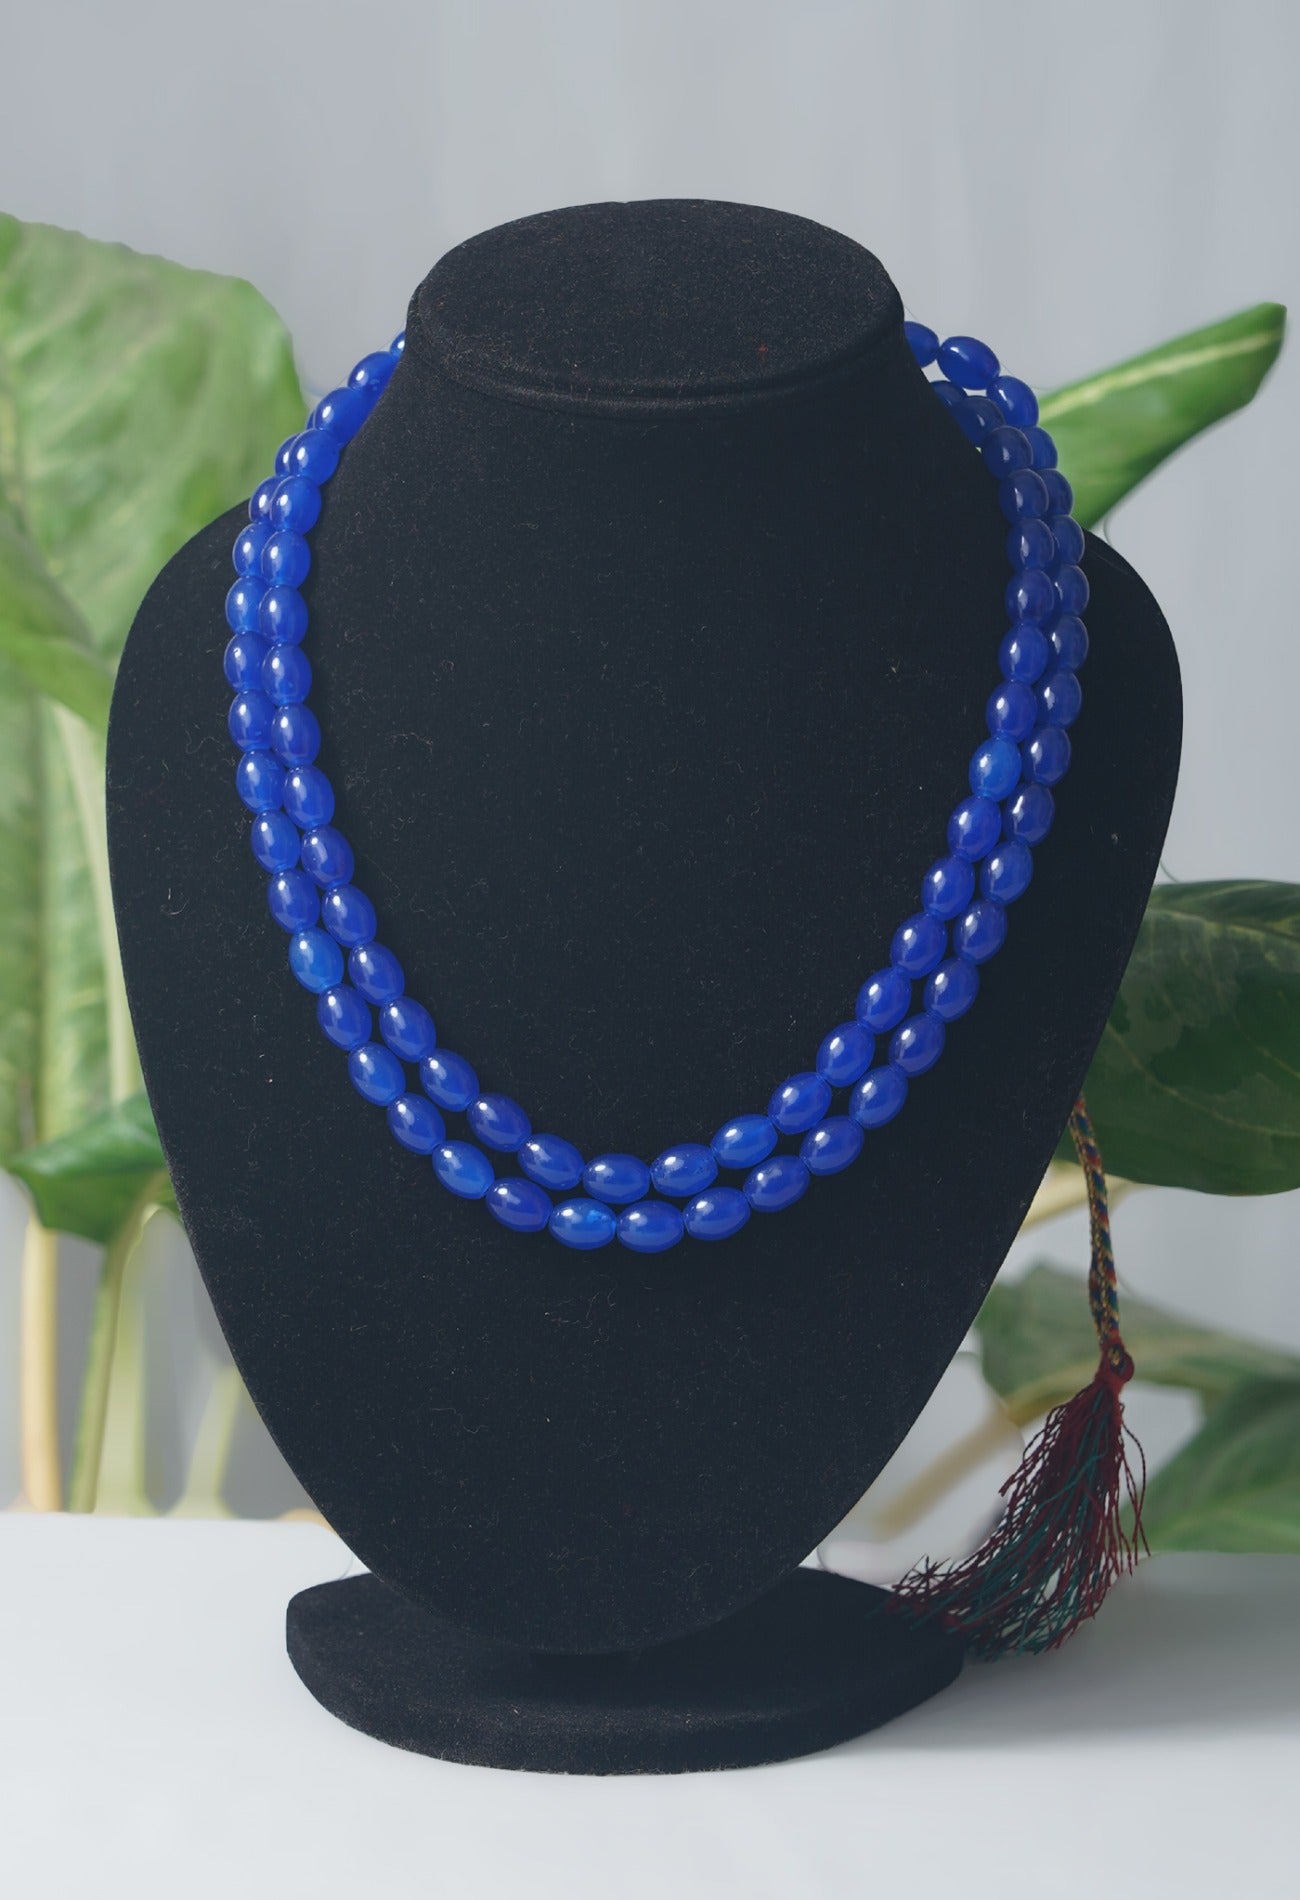 Online Shopping for Blue Amravati Oval Beads Necklace with Pendent with jewellery from Andhra pradesh at Unnatisilks.com India
